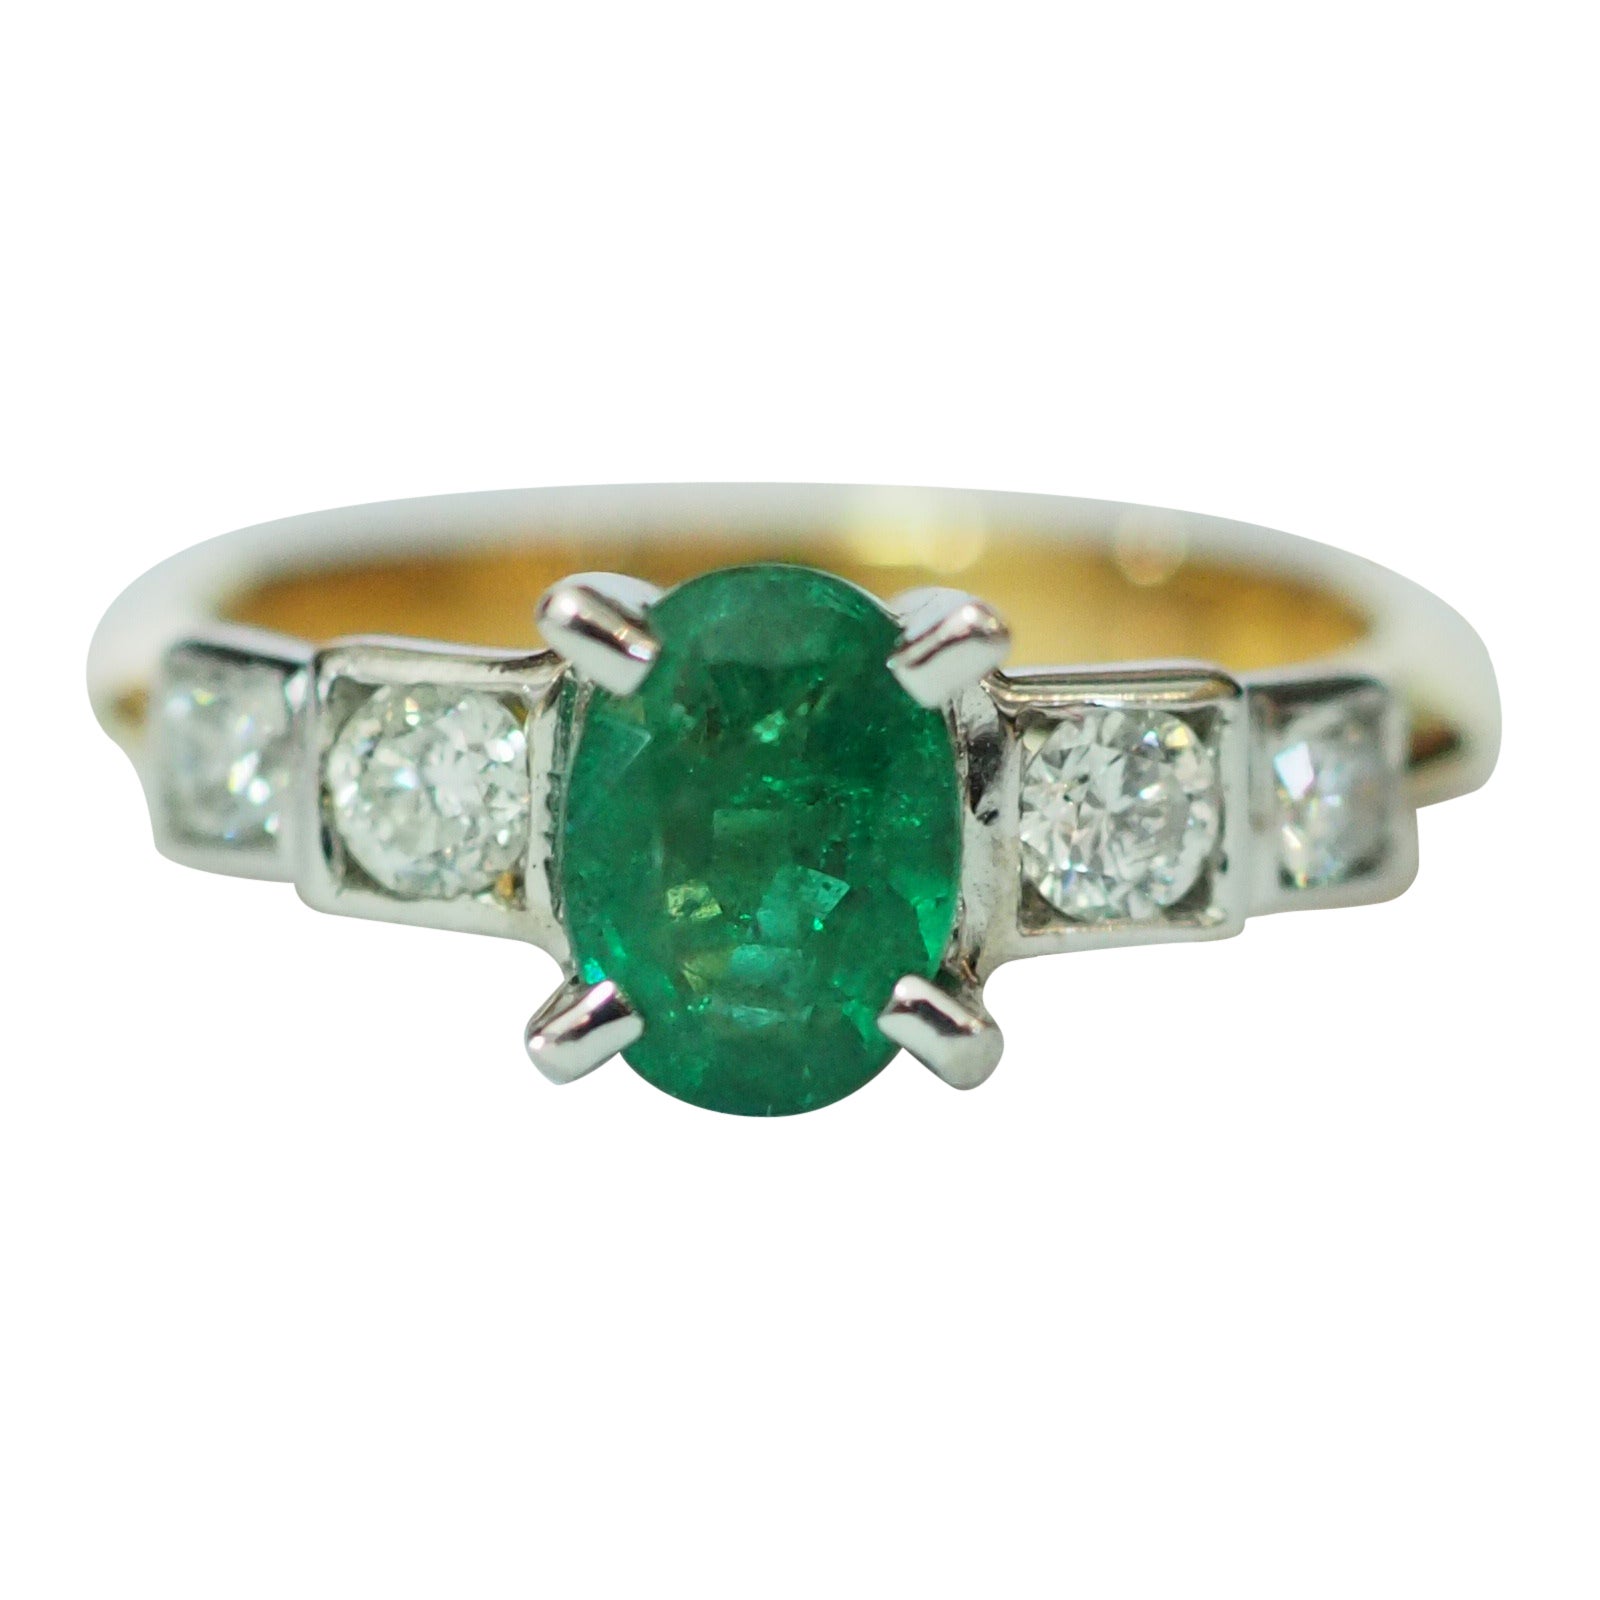 ICA 18k Two-Tone 0.85 Carat Oval Emerald & Diamond Engagement Ring